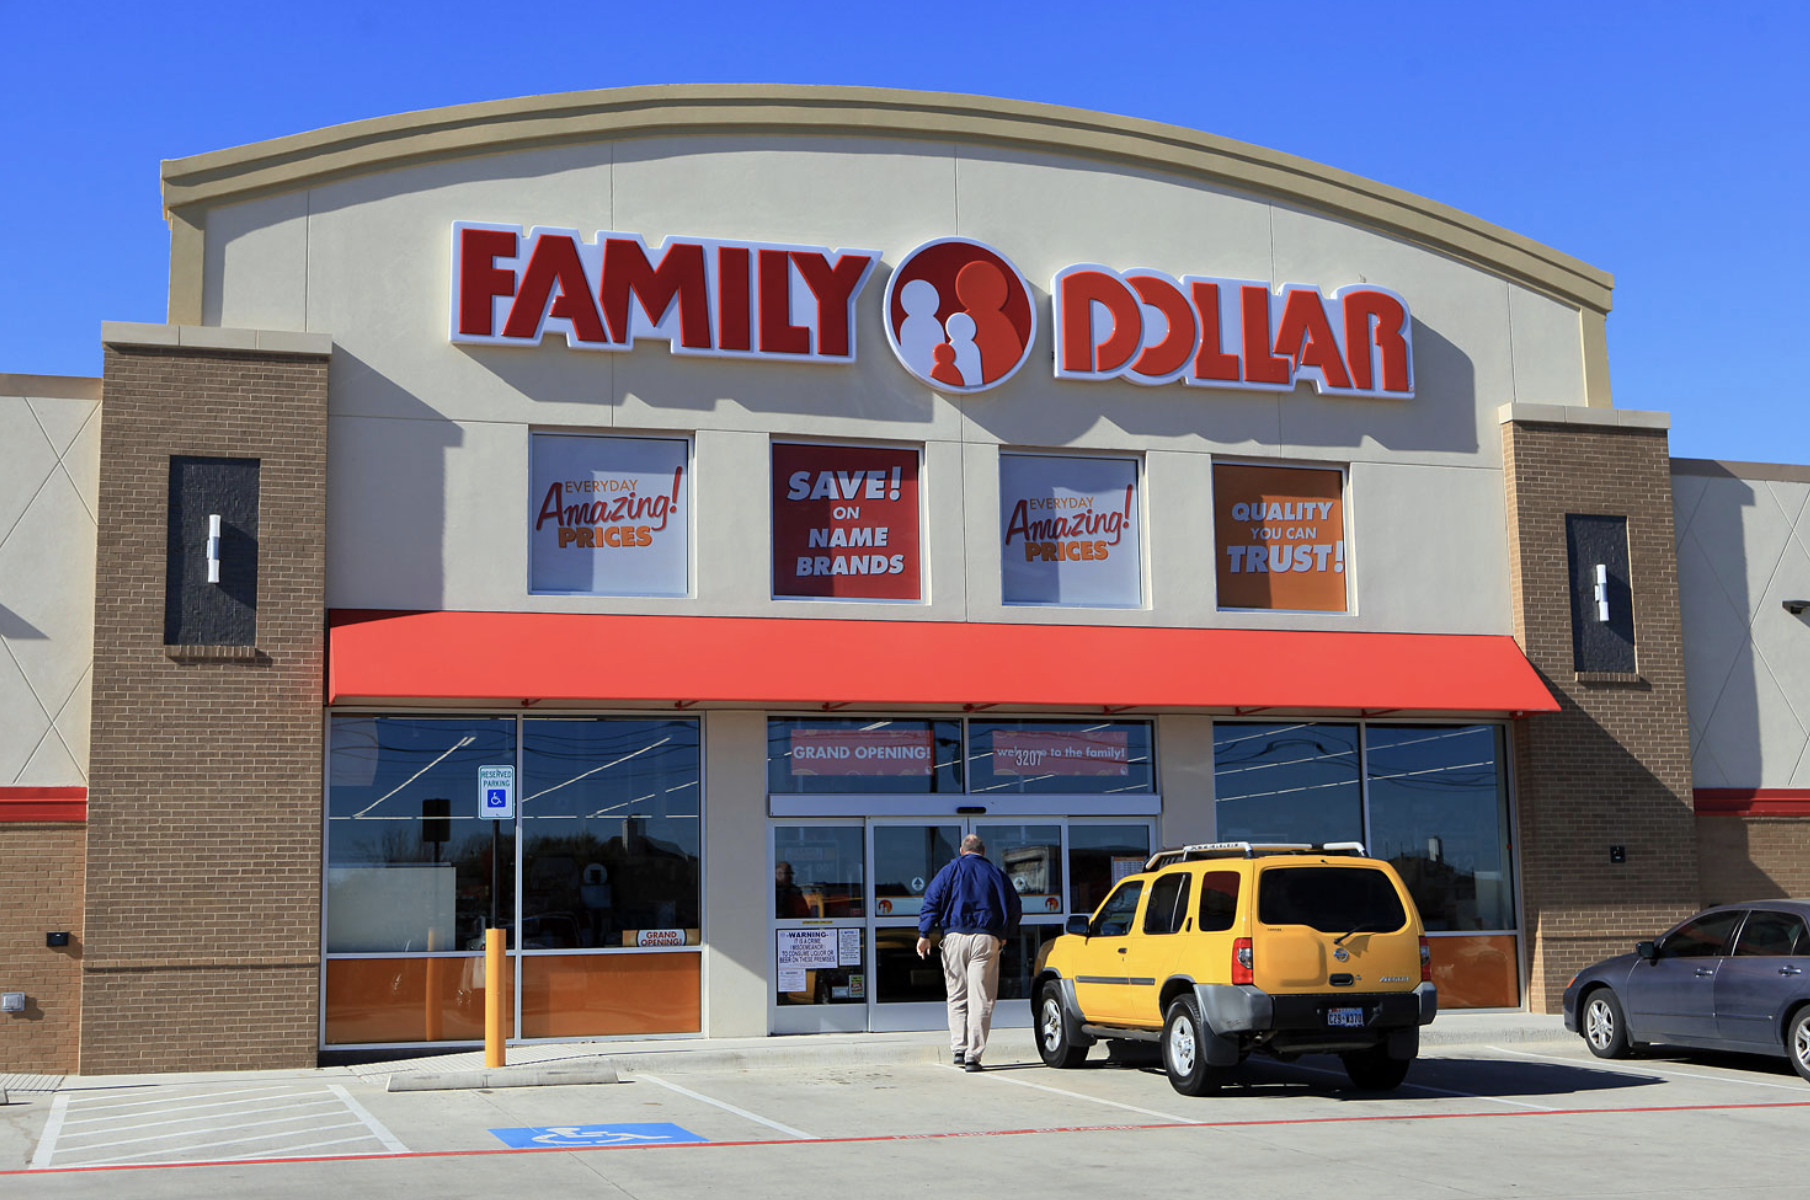 The shop front of a Family Dollar Store